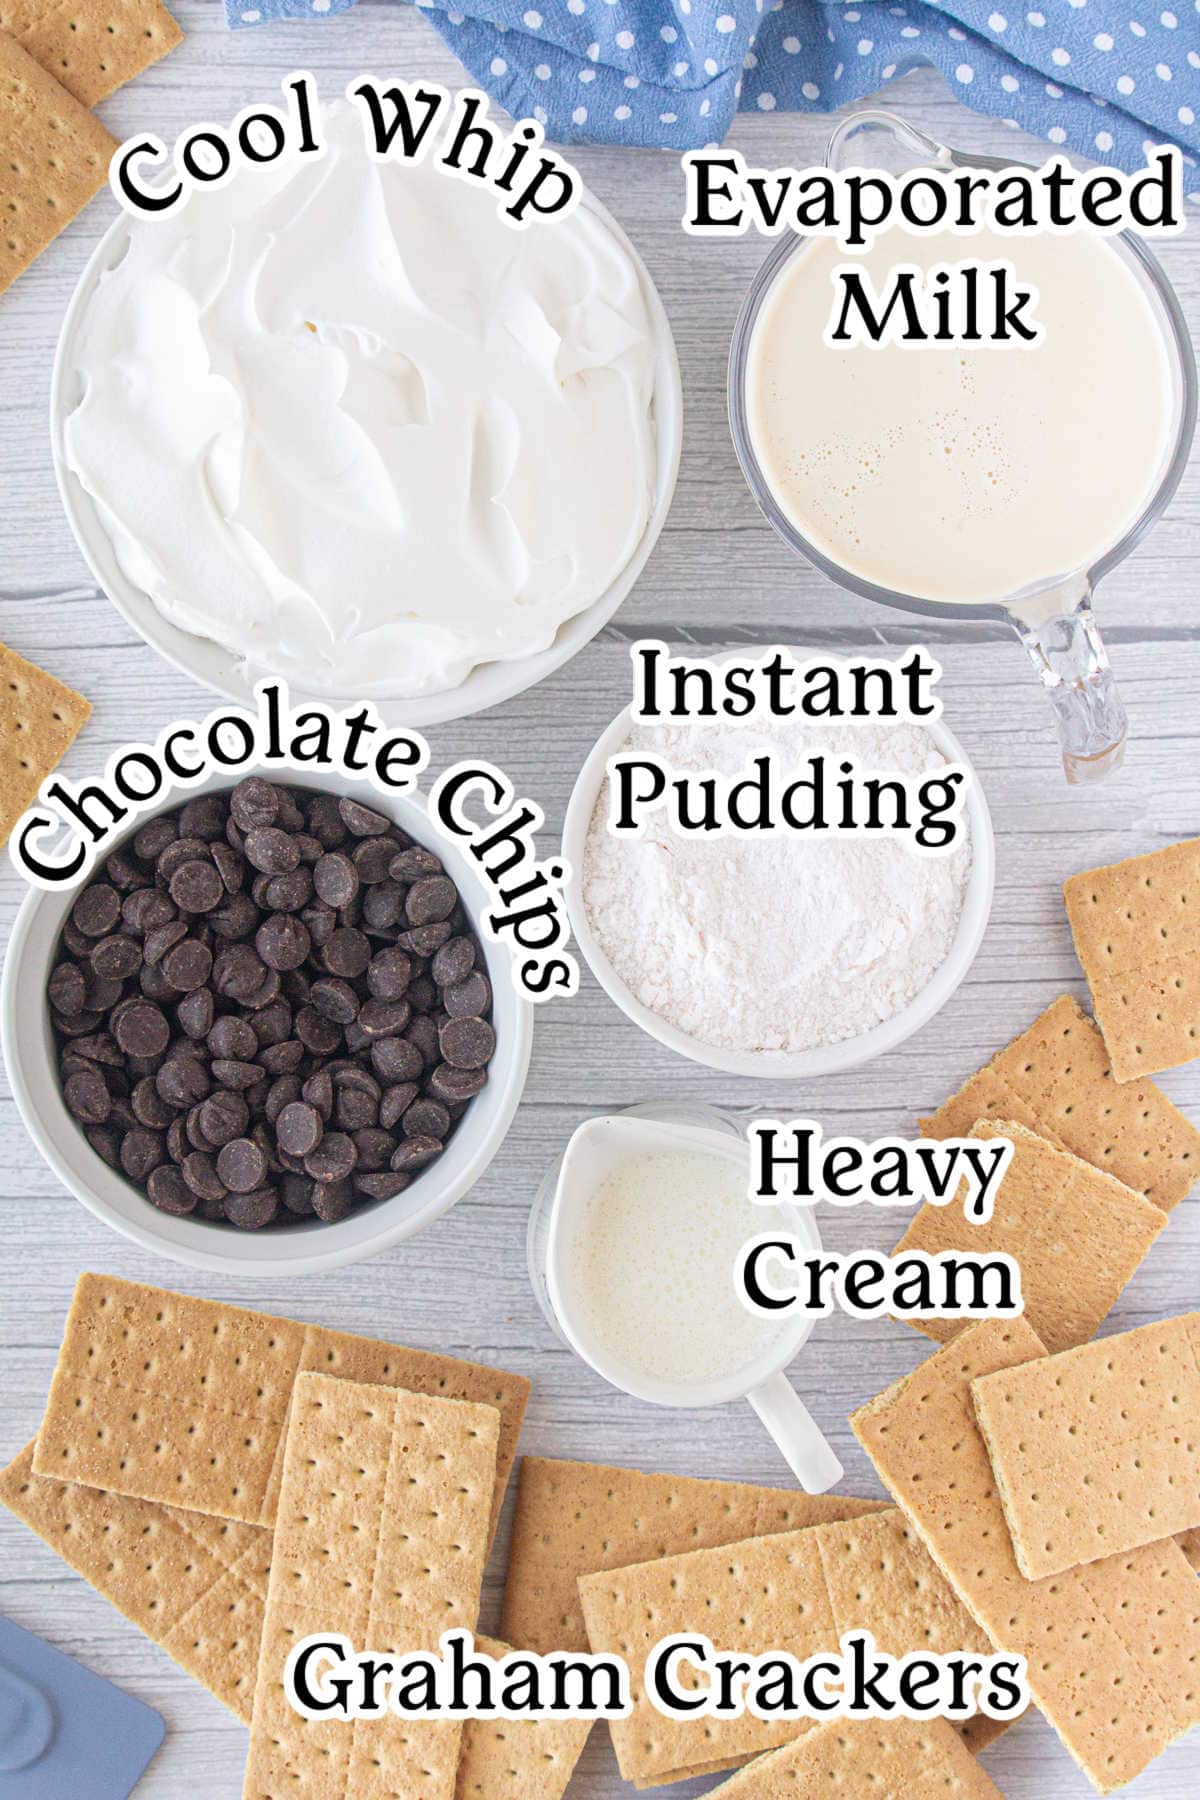 Labeled ingredients for the eclair cake recipe include graham crackers, pudding mix, Cool Whip, heavy cream, and chocolate chips.